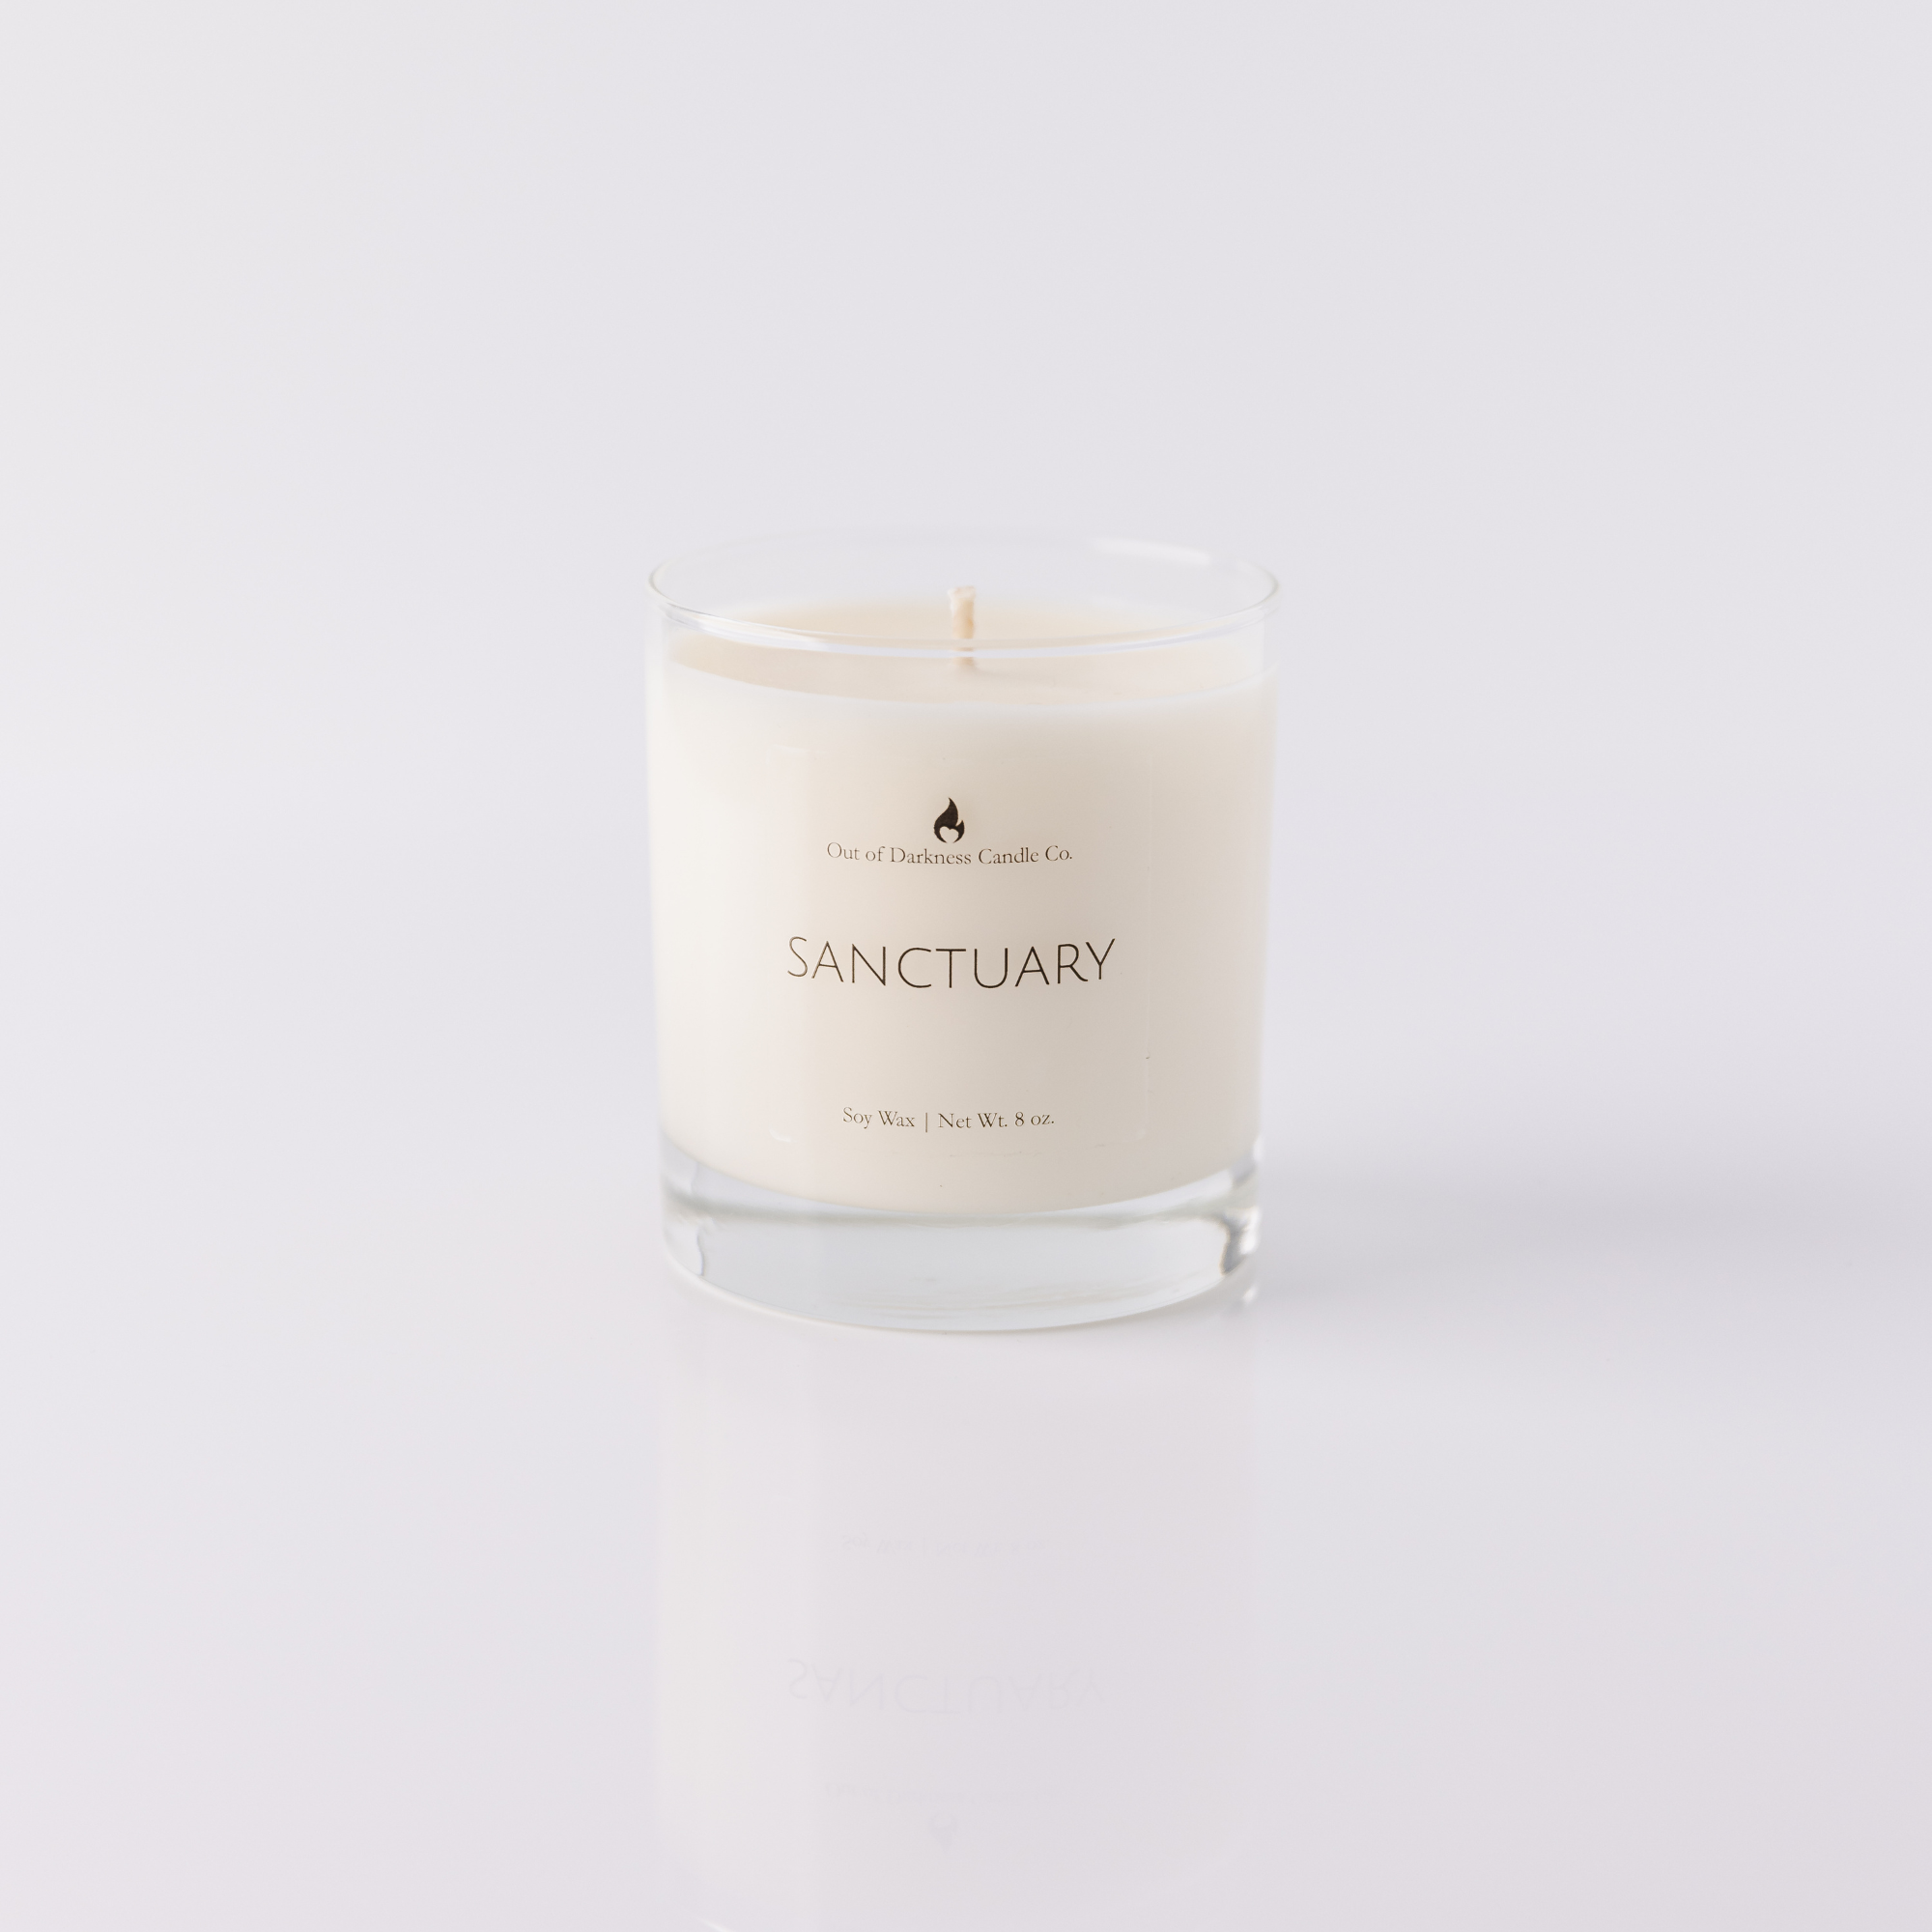 Clear glass candle jar says sanctuary all white background